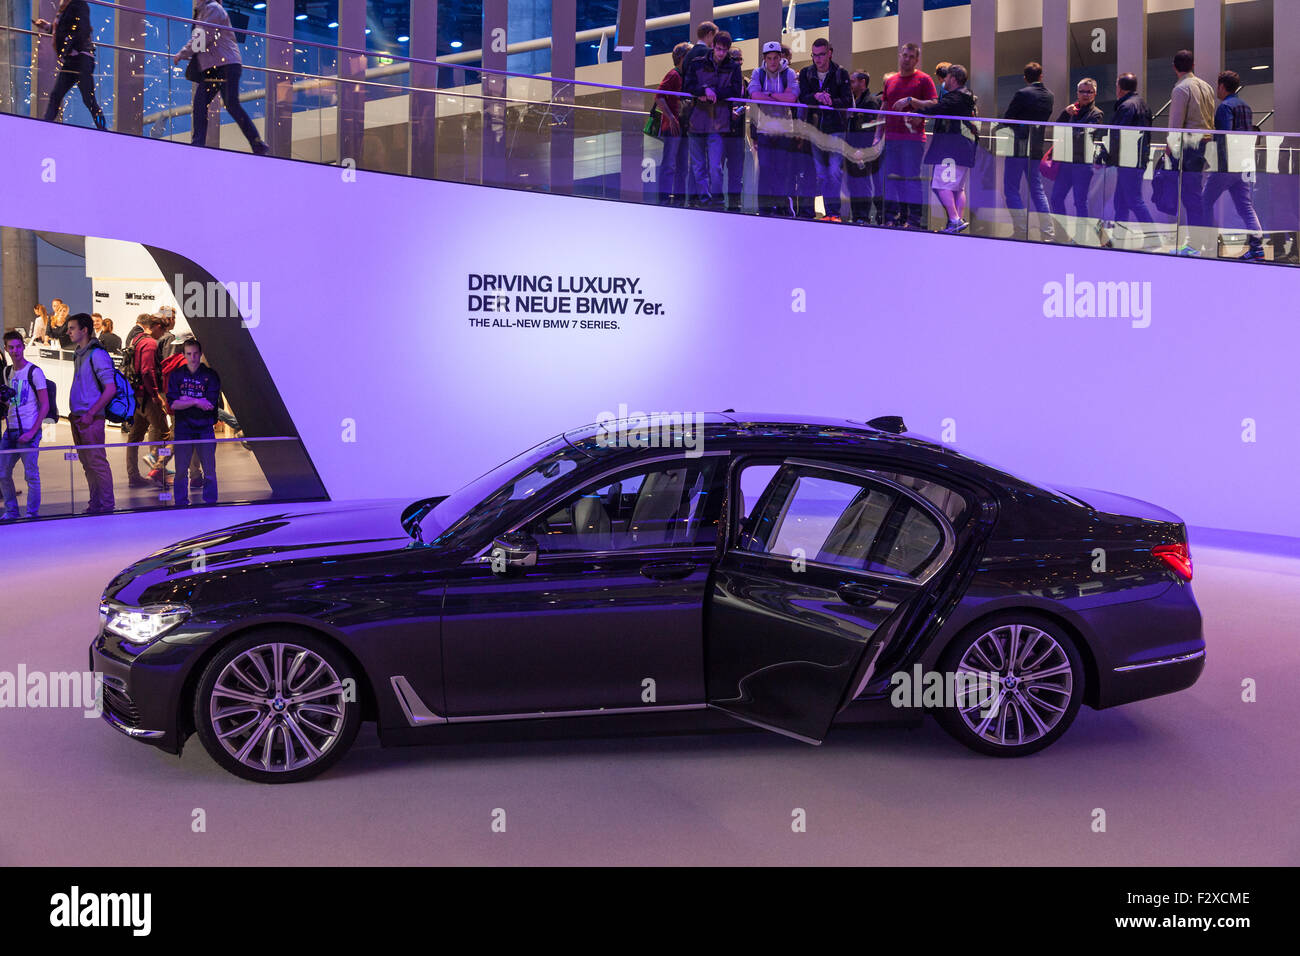 Bmw 7 Near The Louis Vuitton Clothing Store Stock Photo - Download Image  Now - Airbag, BMW, Blue - iStock